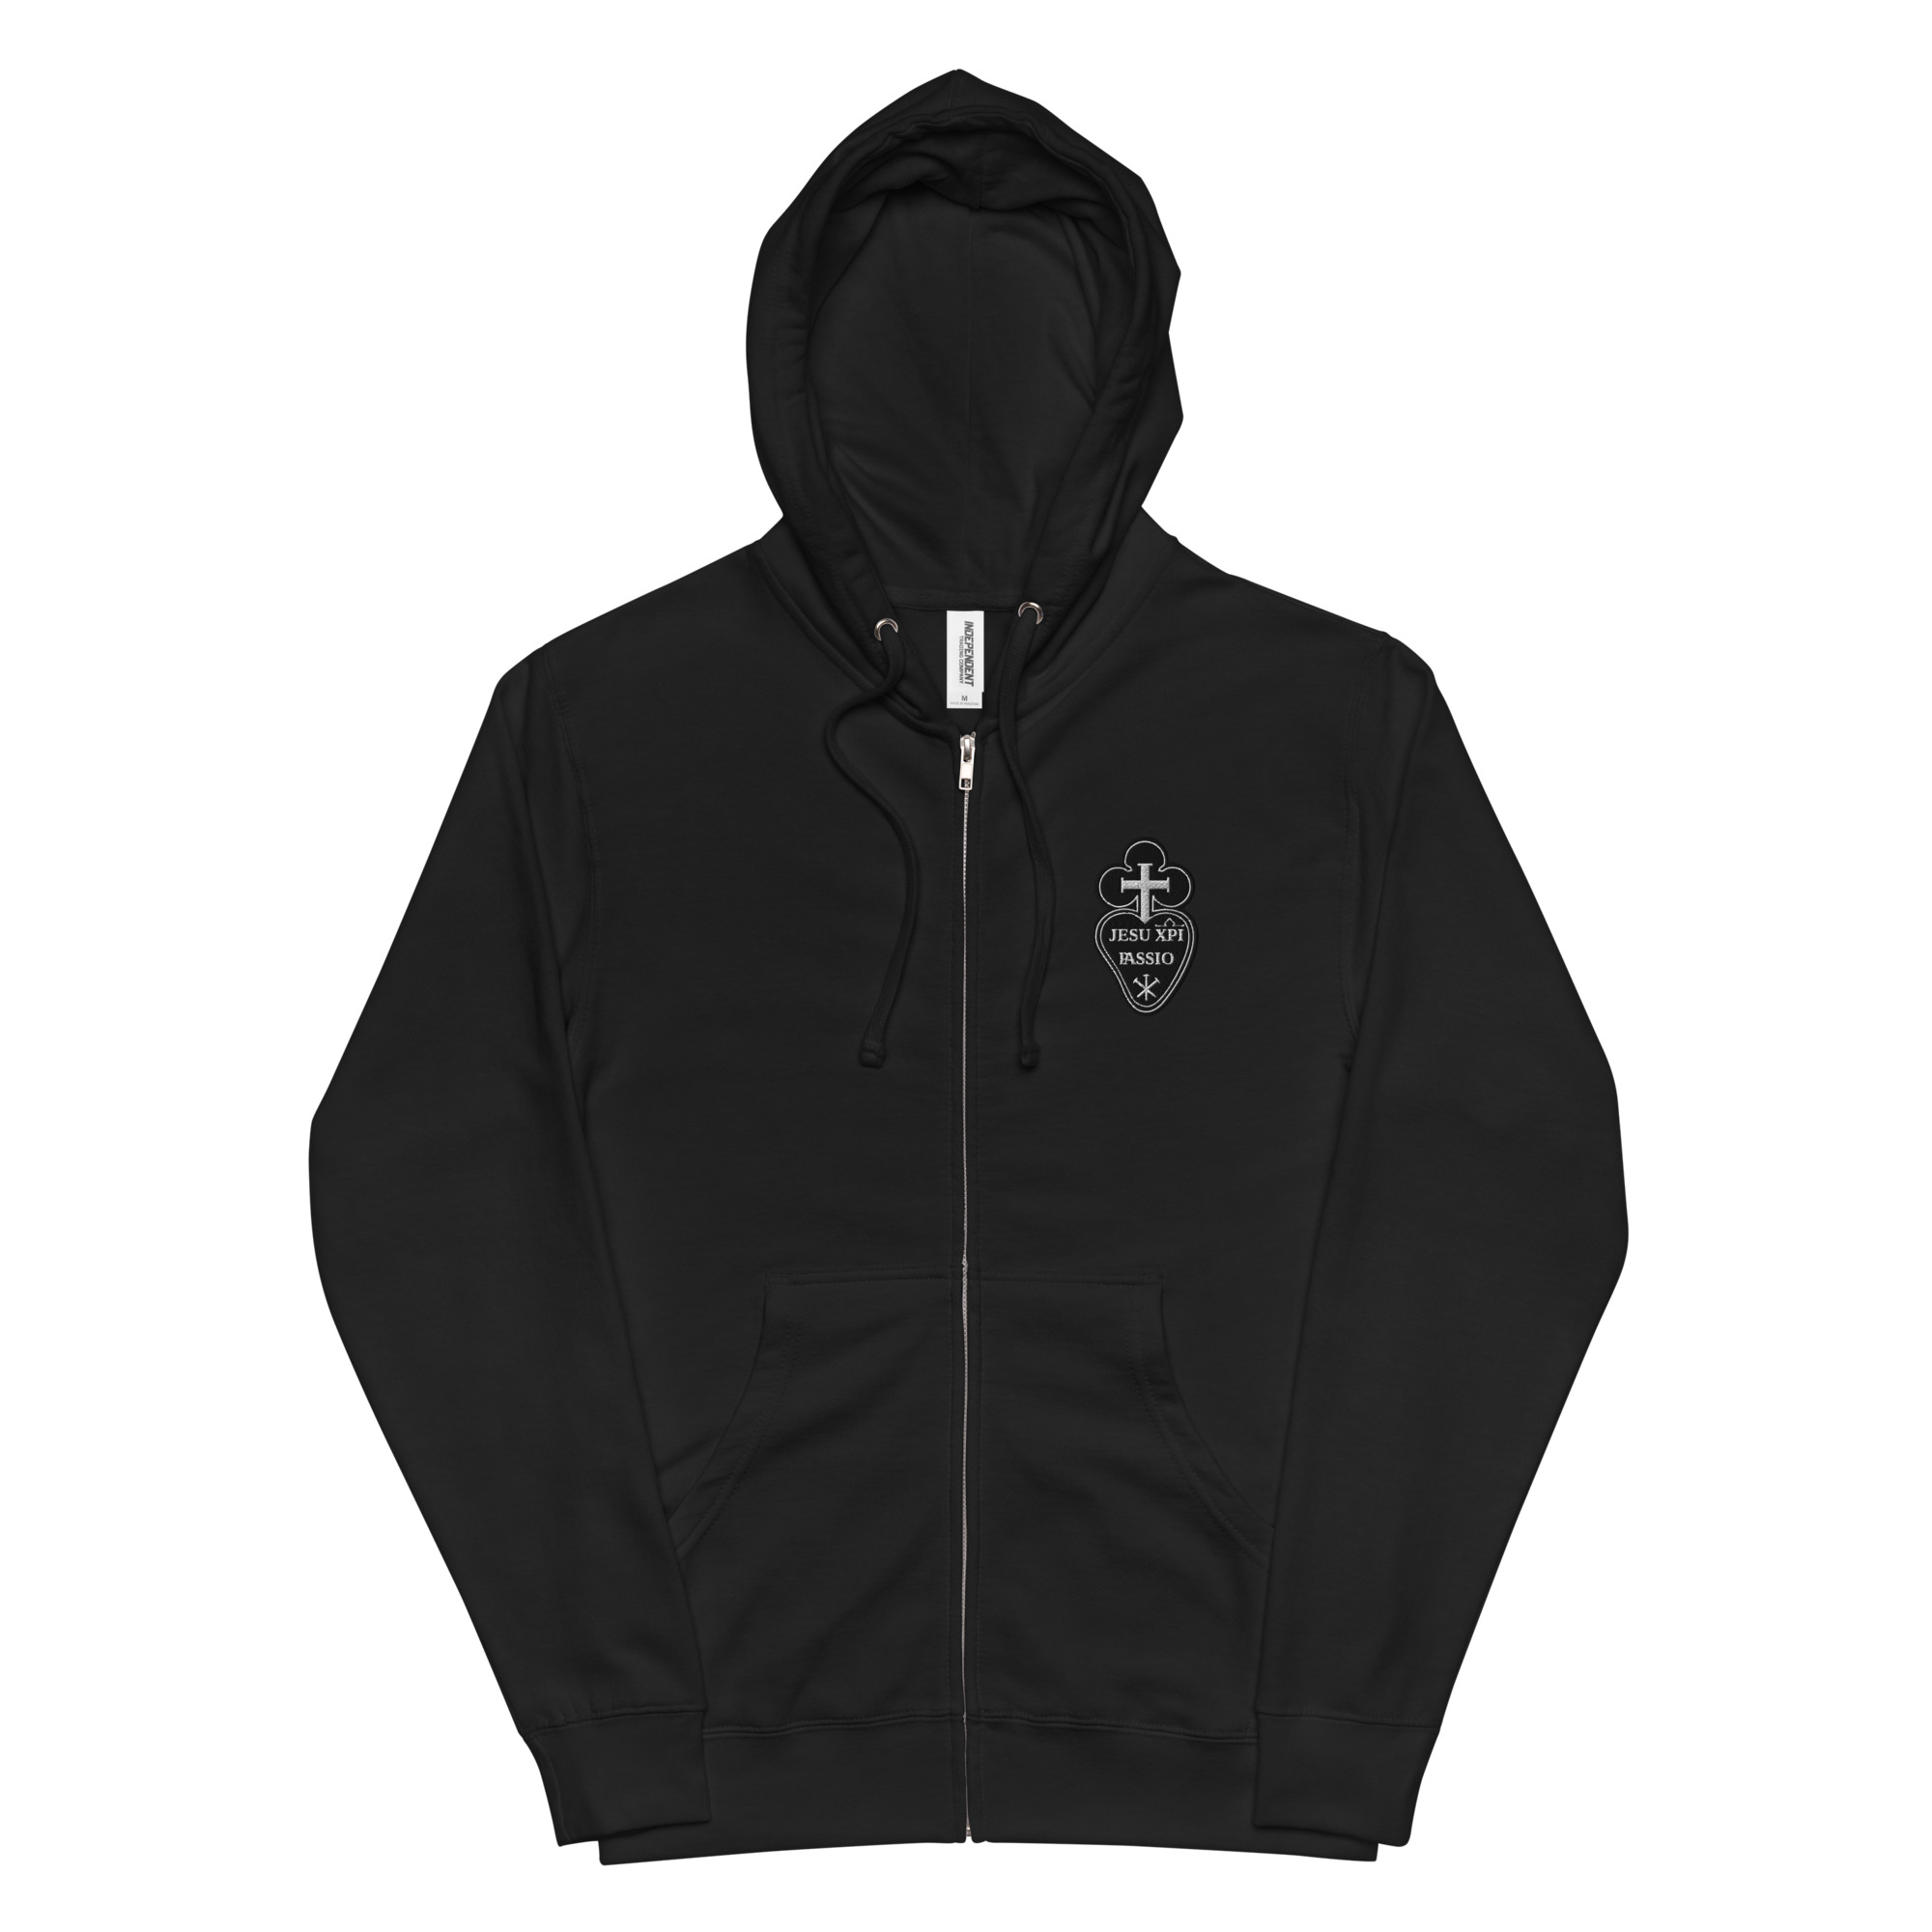 Passionist embroidered Unisex fleece zip up hoodie Apparel Rosary.Team